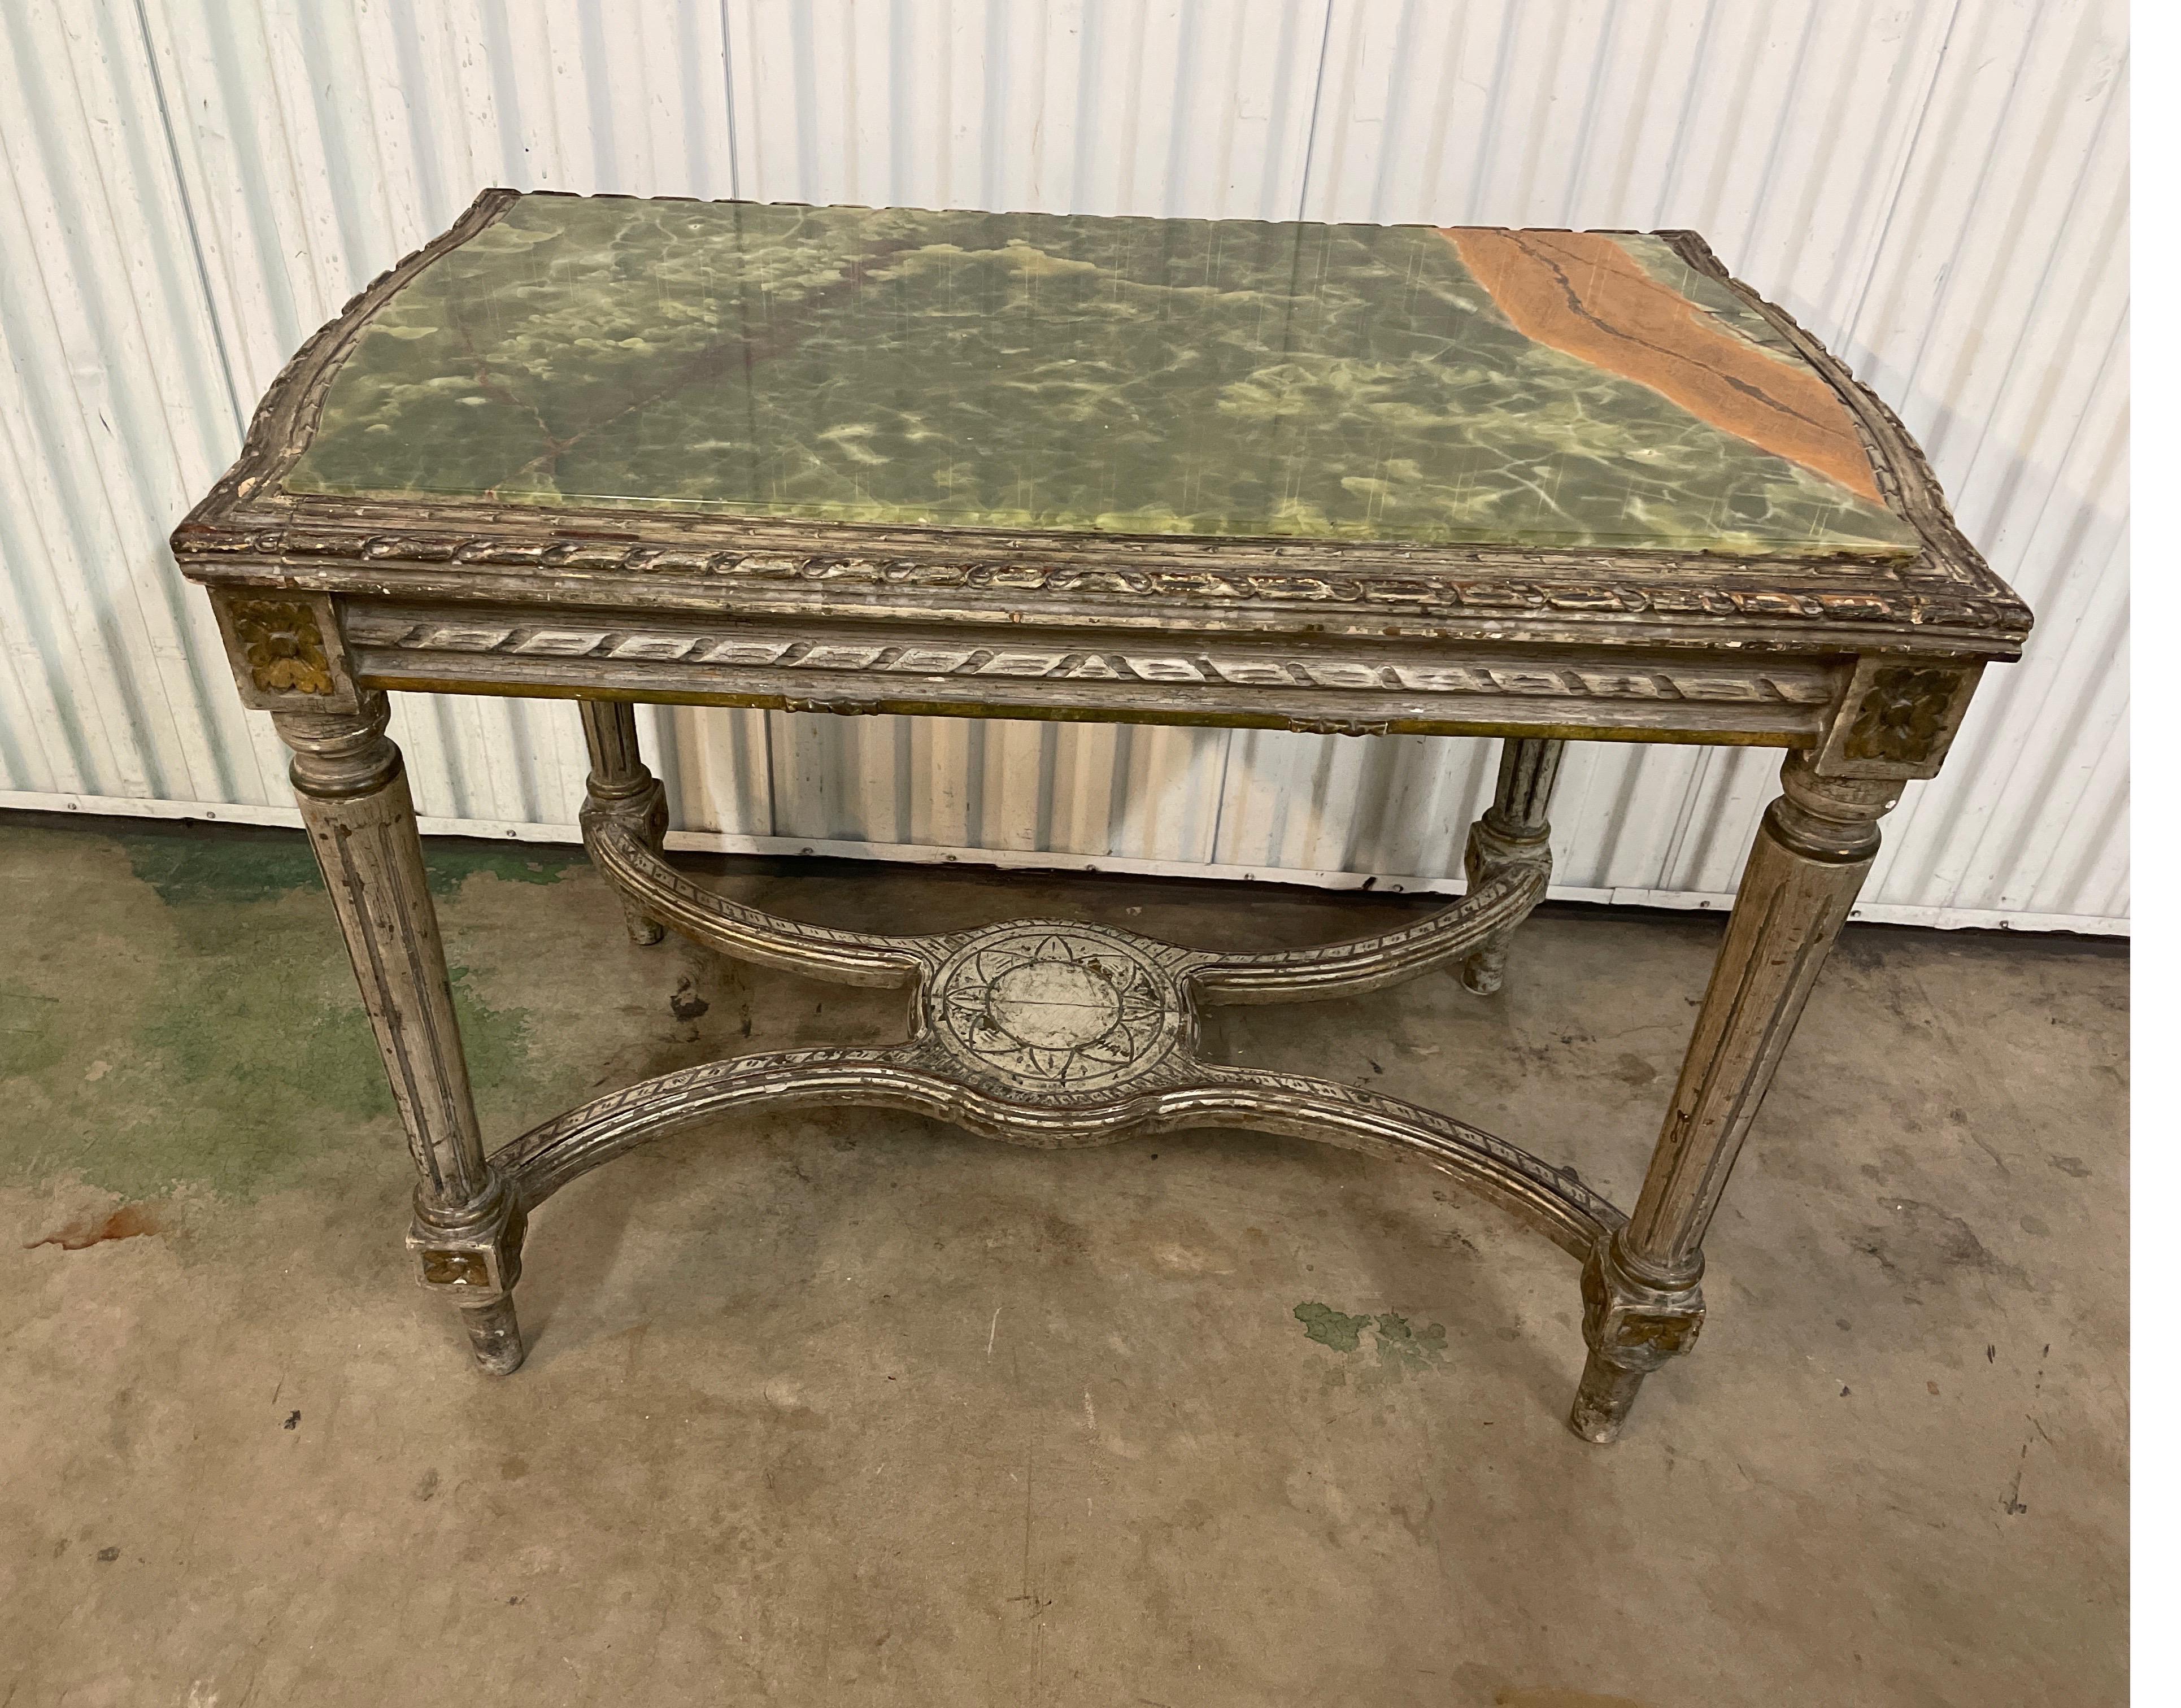 Antique Louis XVI Style carved wood center table with onyx top.